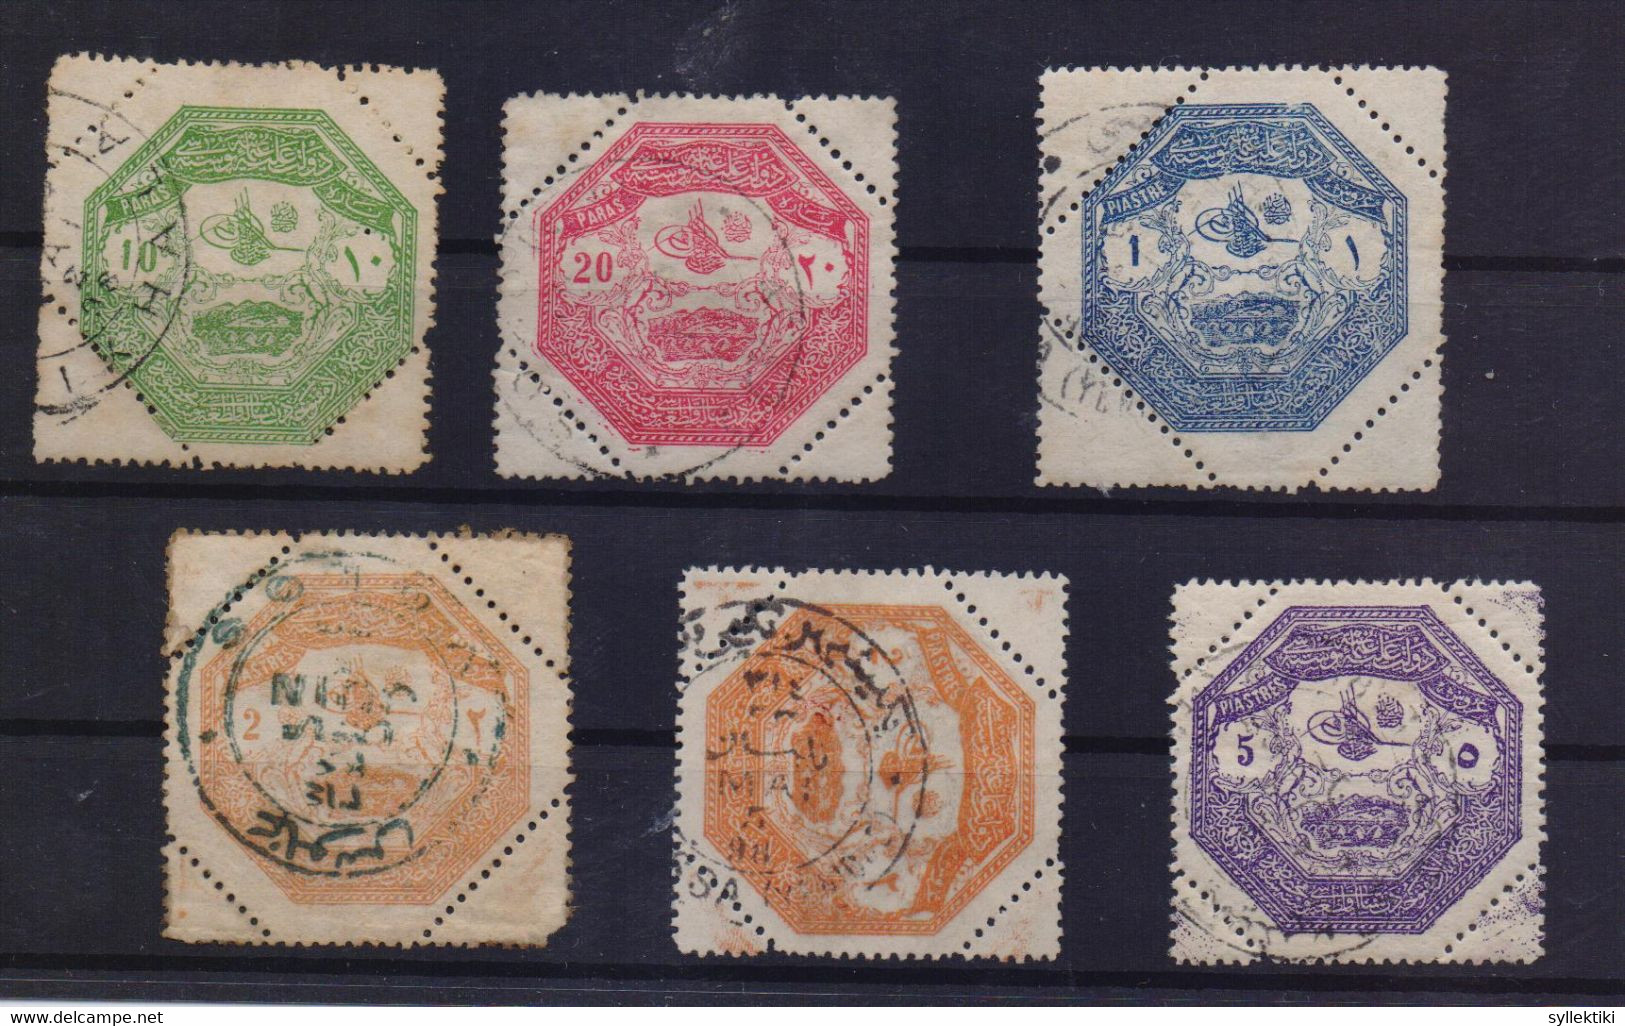 GREECE 1898 THESALLY COMPLETE SET USED STAMPS - Thessaly